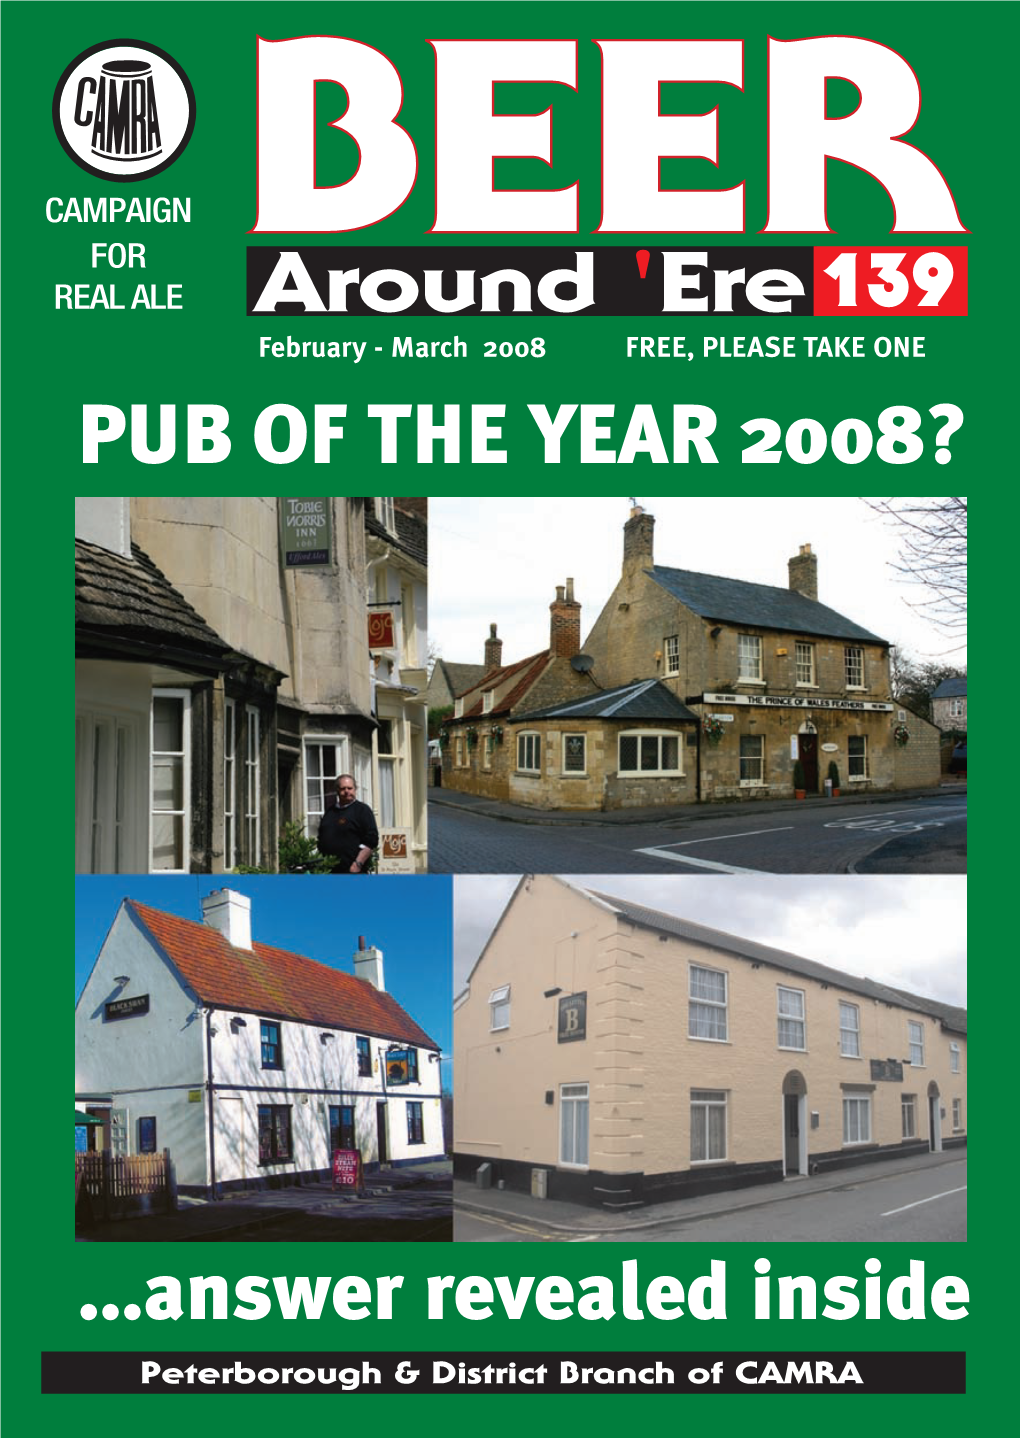 Pub of the Year 2008?